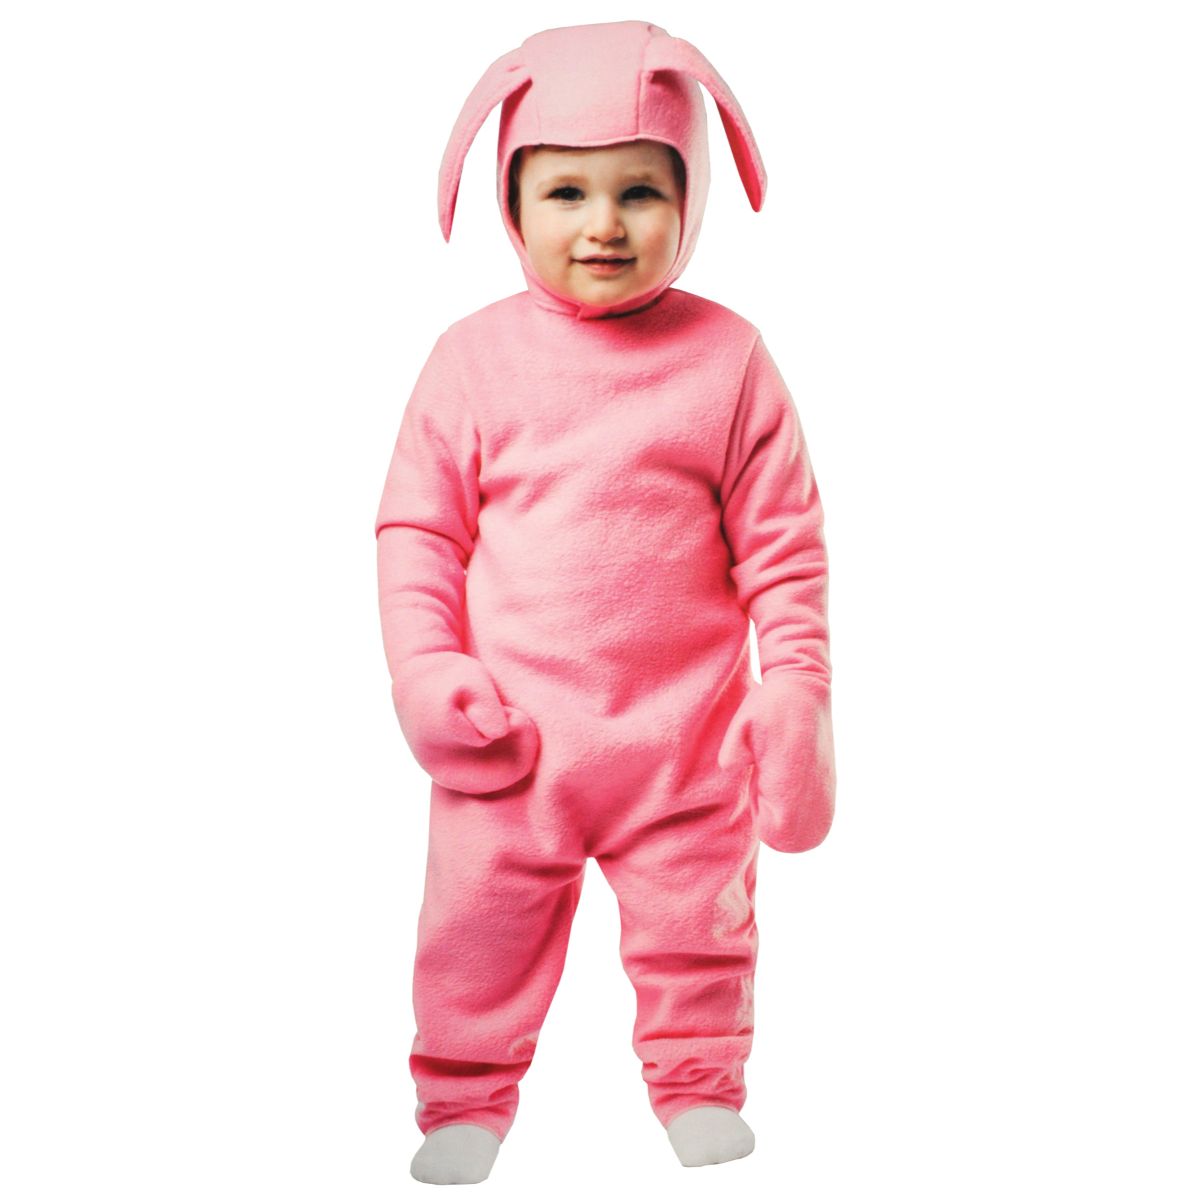 The Costume Center Pink Story Bunny Unisex Toddler Christmas Costume - Small